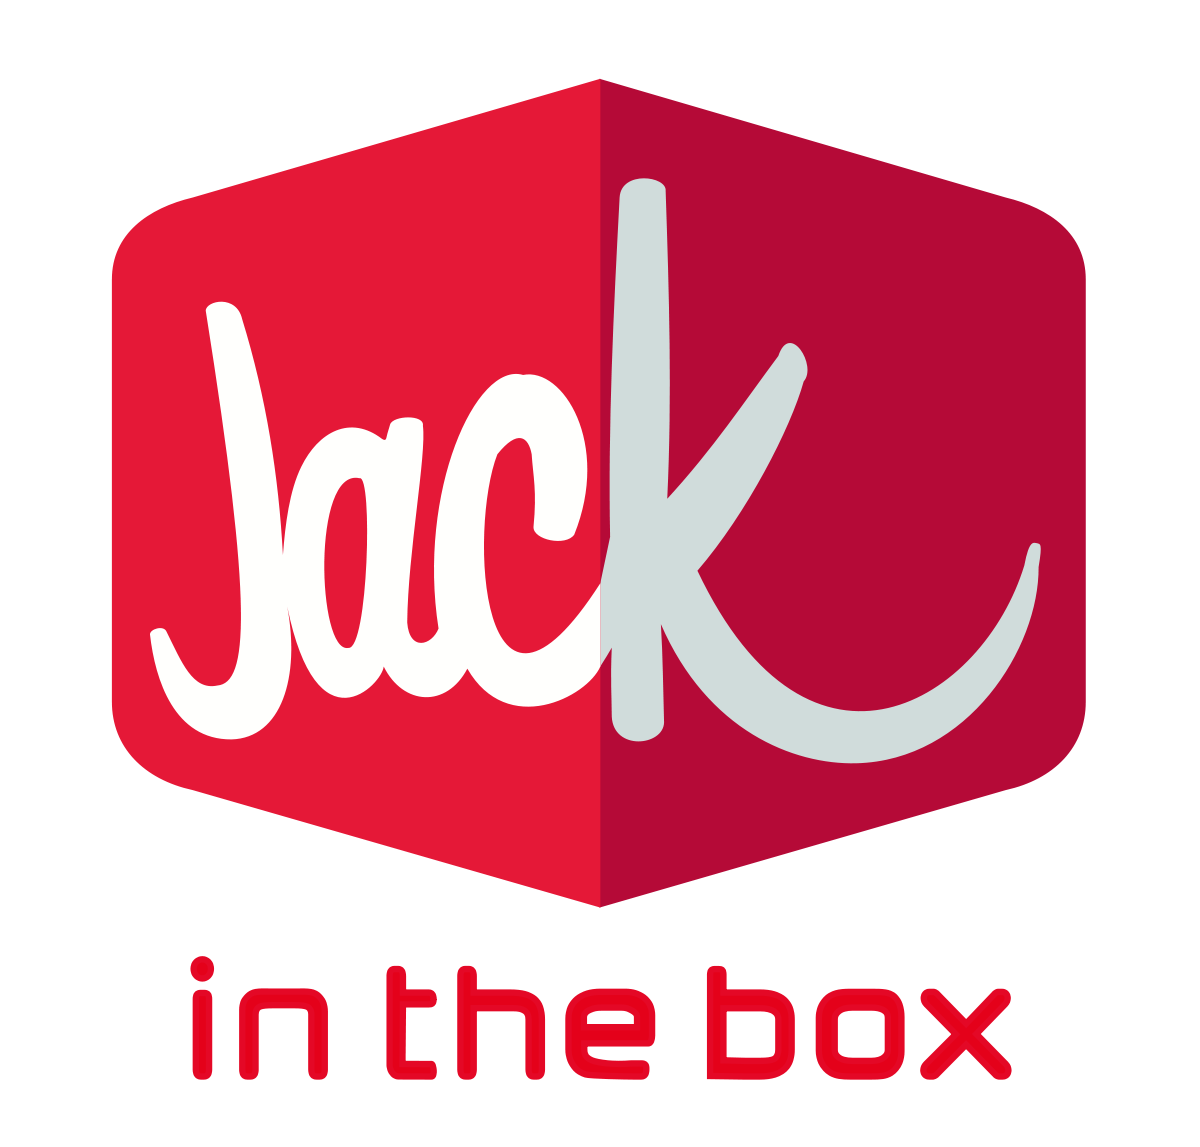 In 1951, the first Jack-in-the-Box fast food restaurant opened in San Diego.